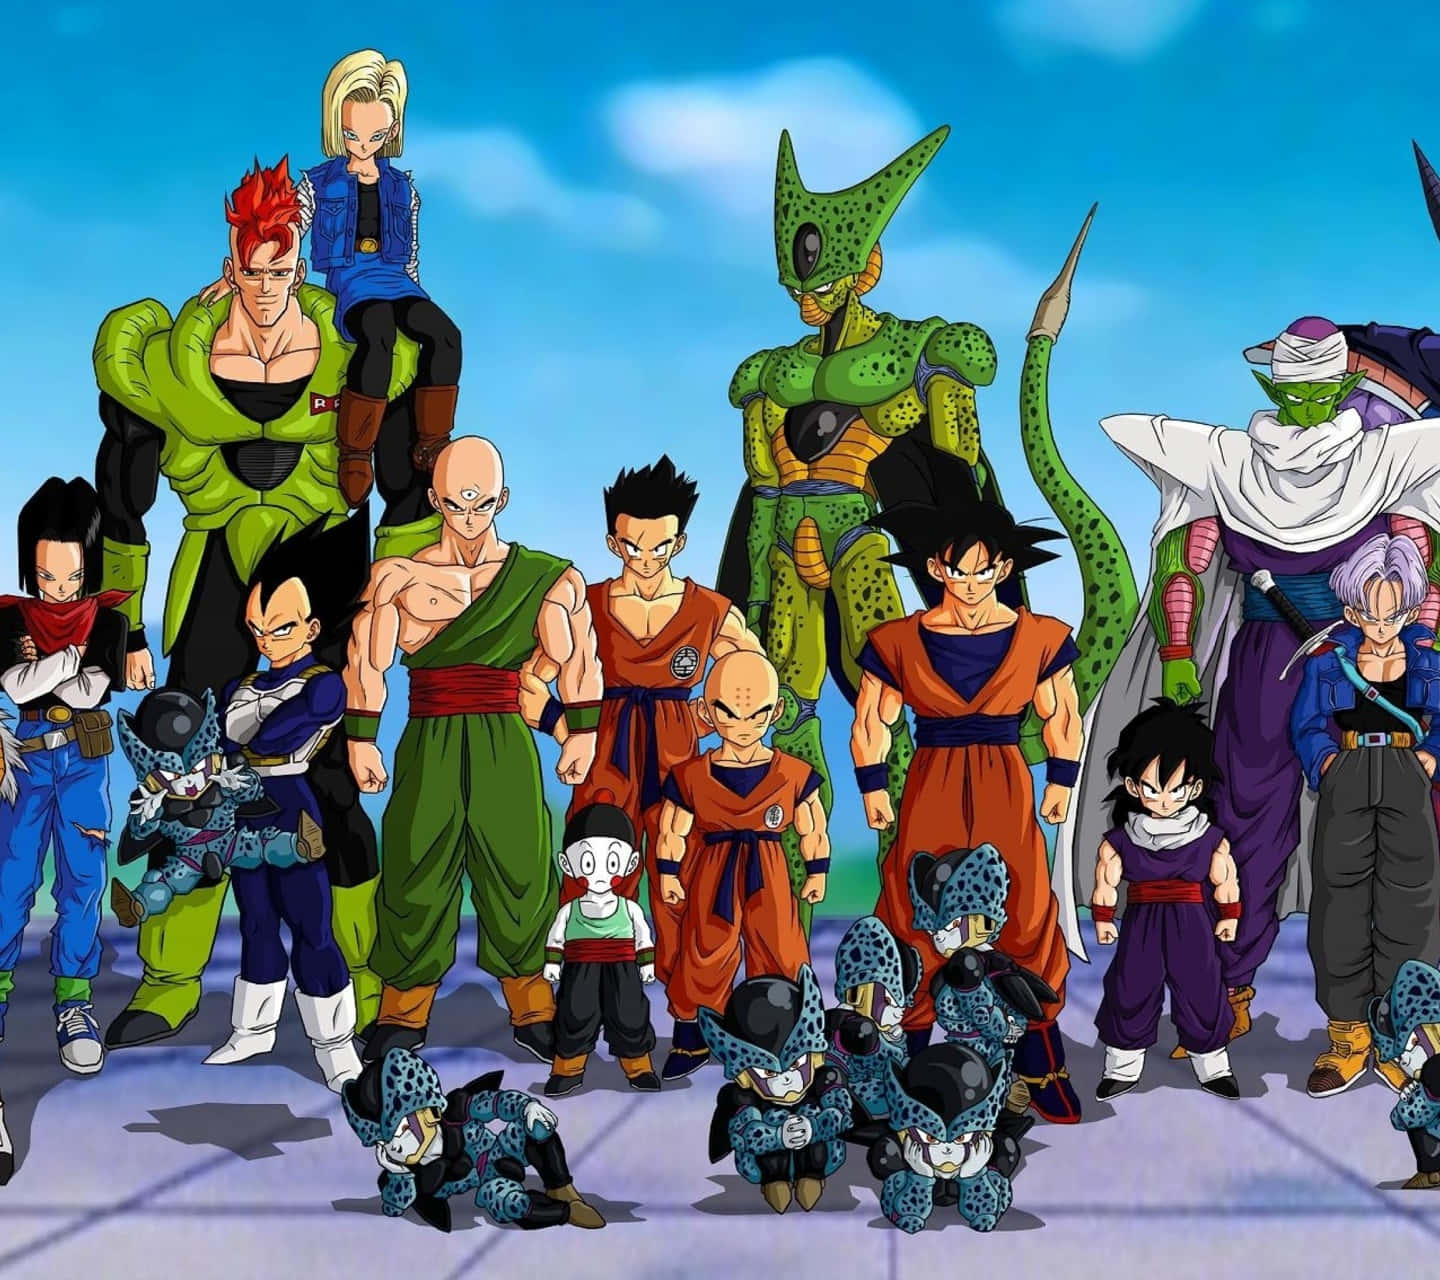 Exciting Dragon Ball Z Characters Lineup Wallpaper